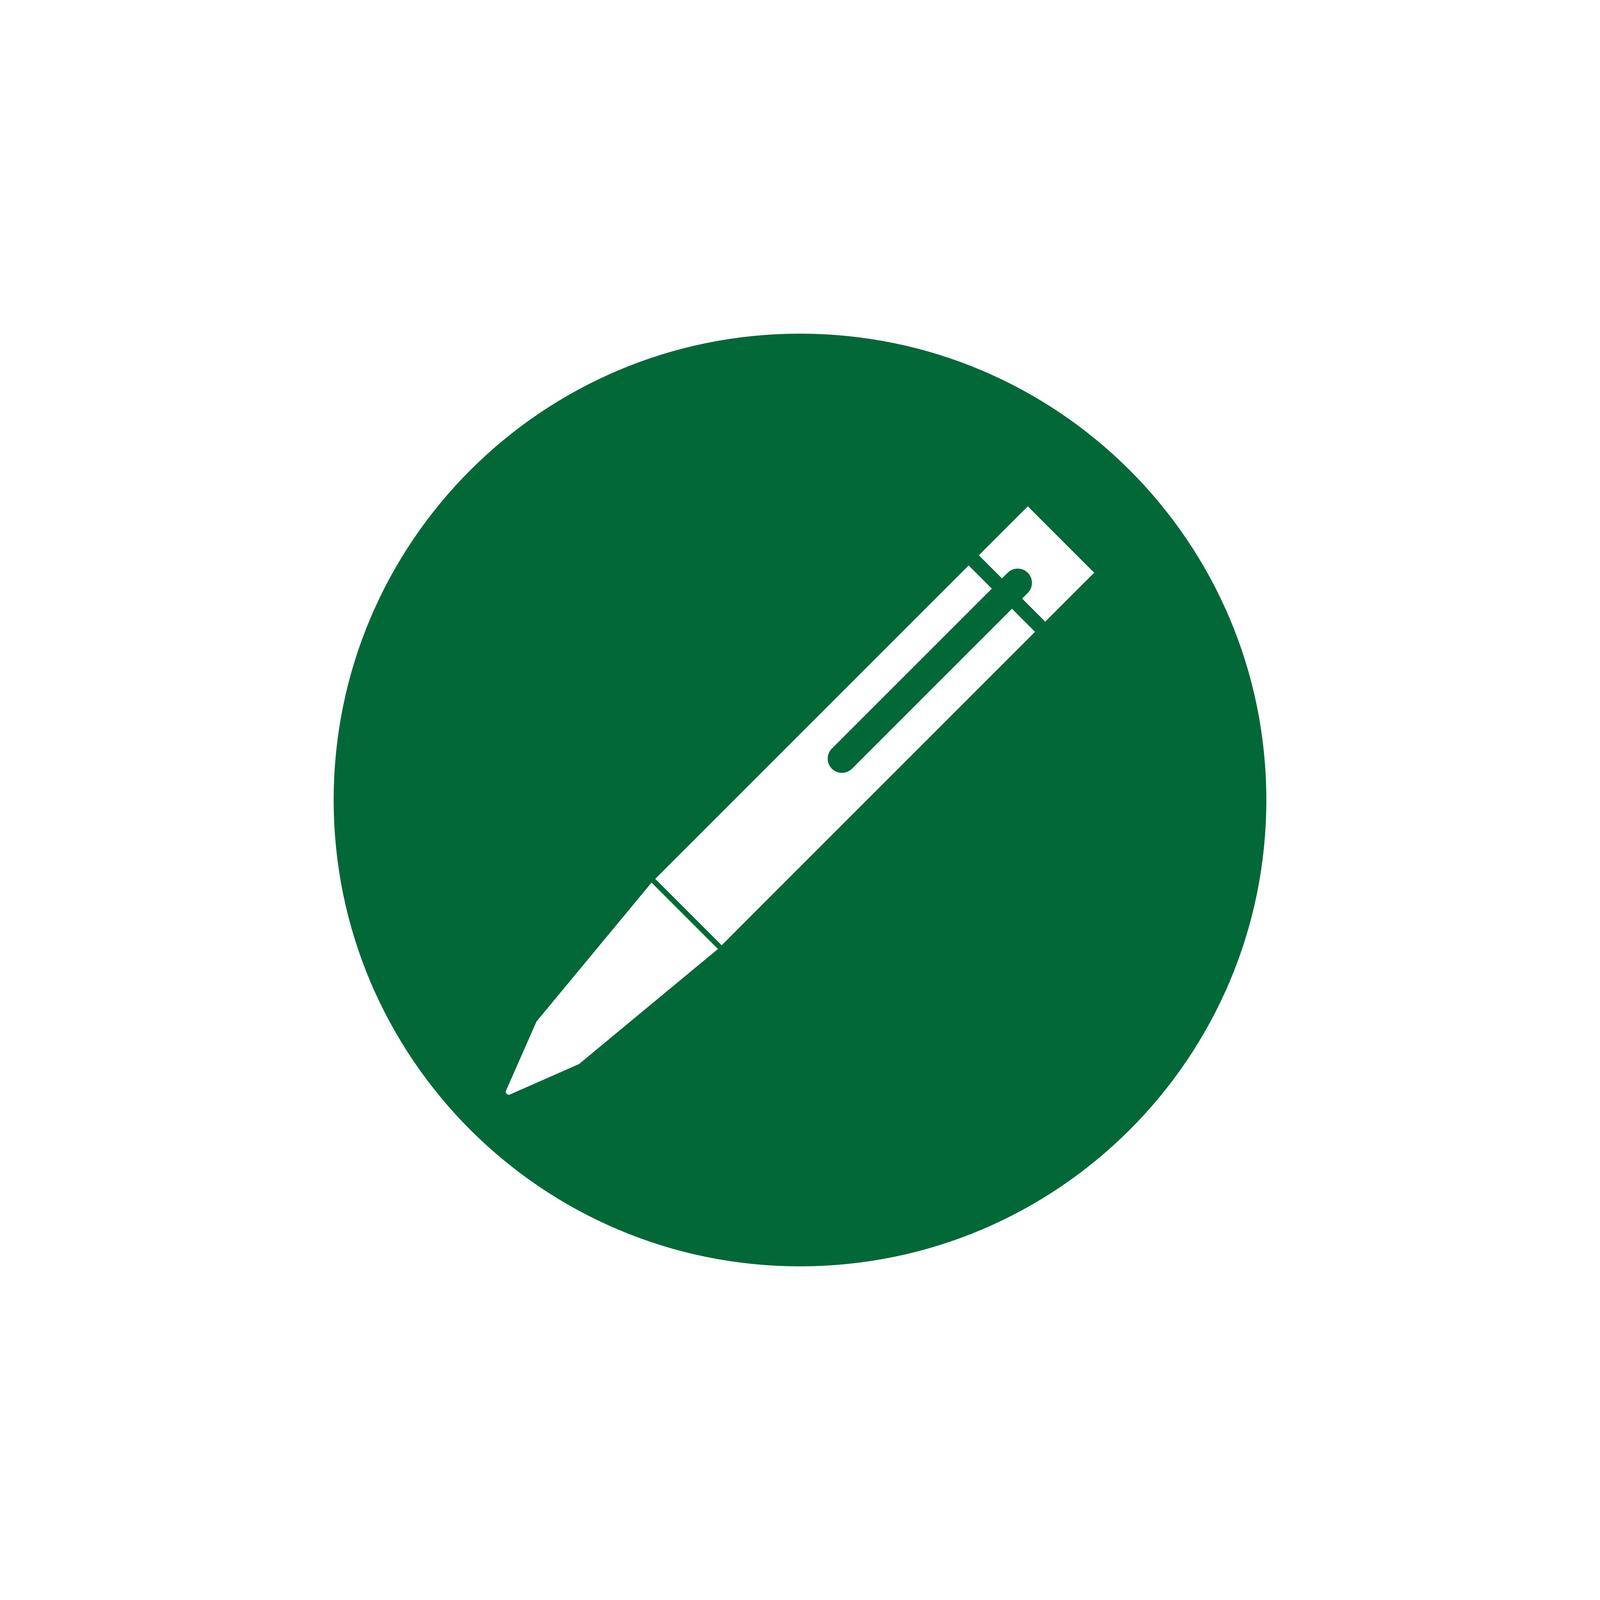 Pen icon by rnking